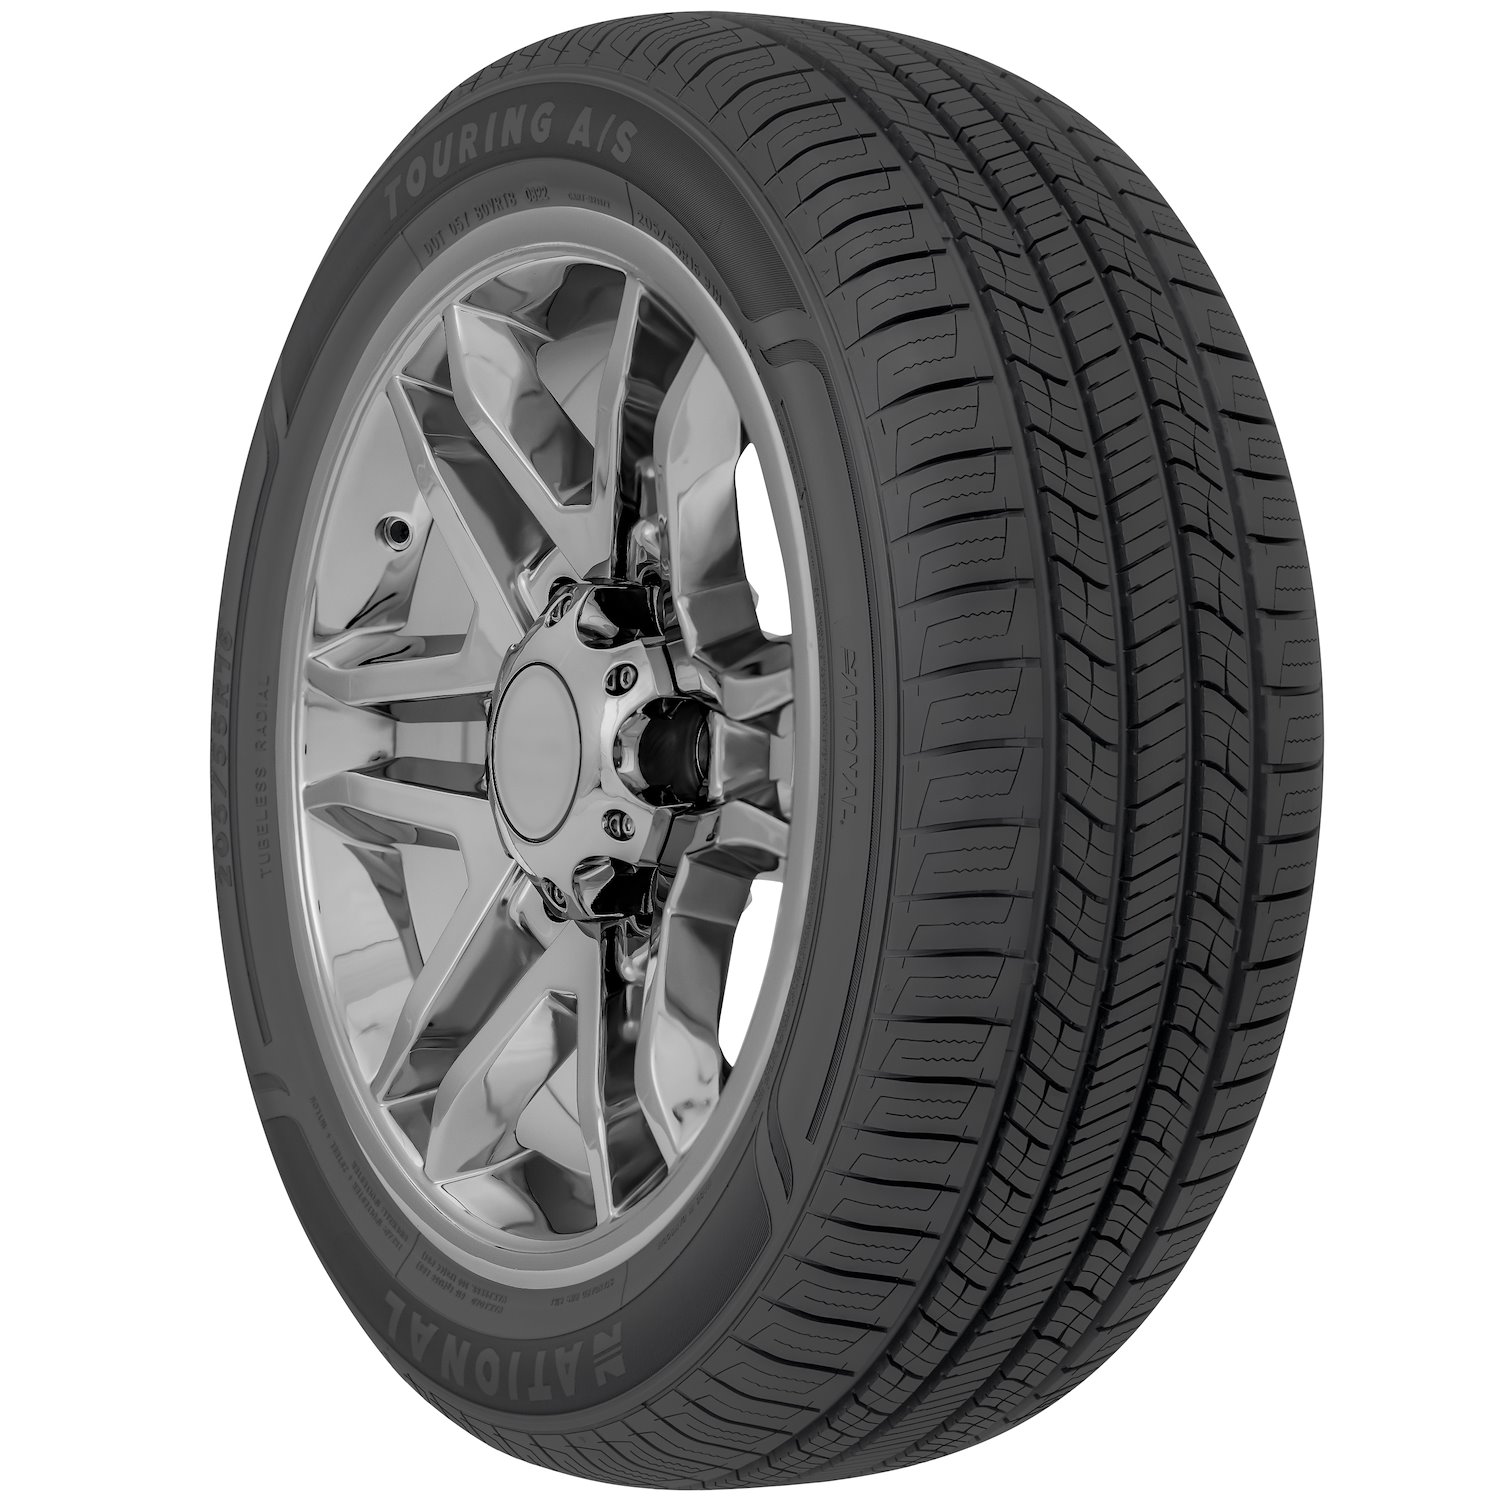 NLR23 Touring A/S Tire, 235/45R18